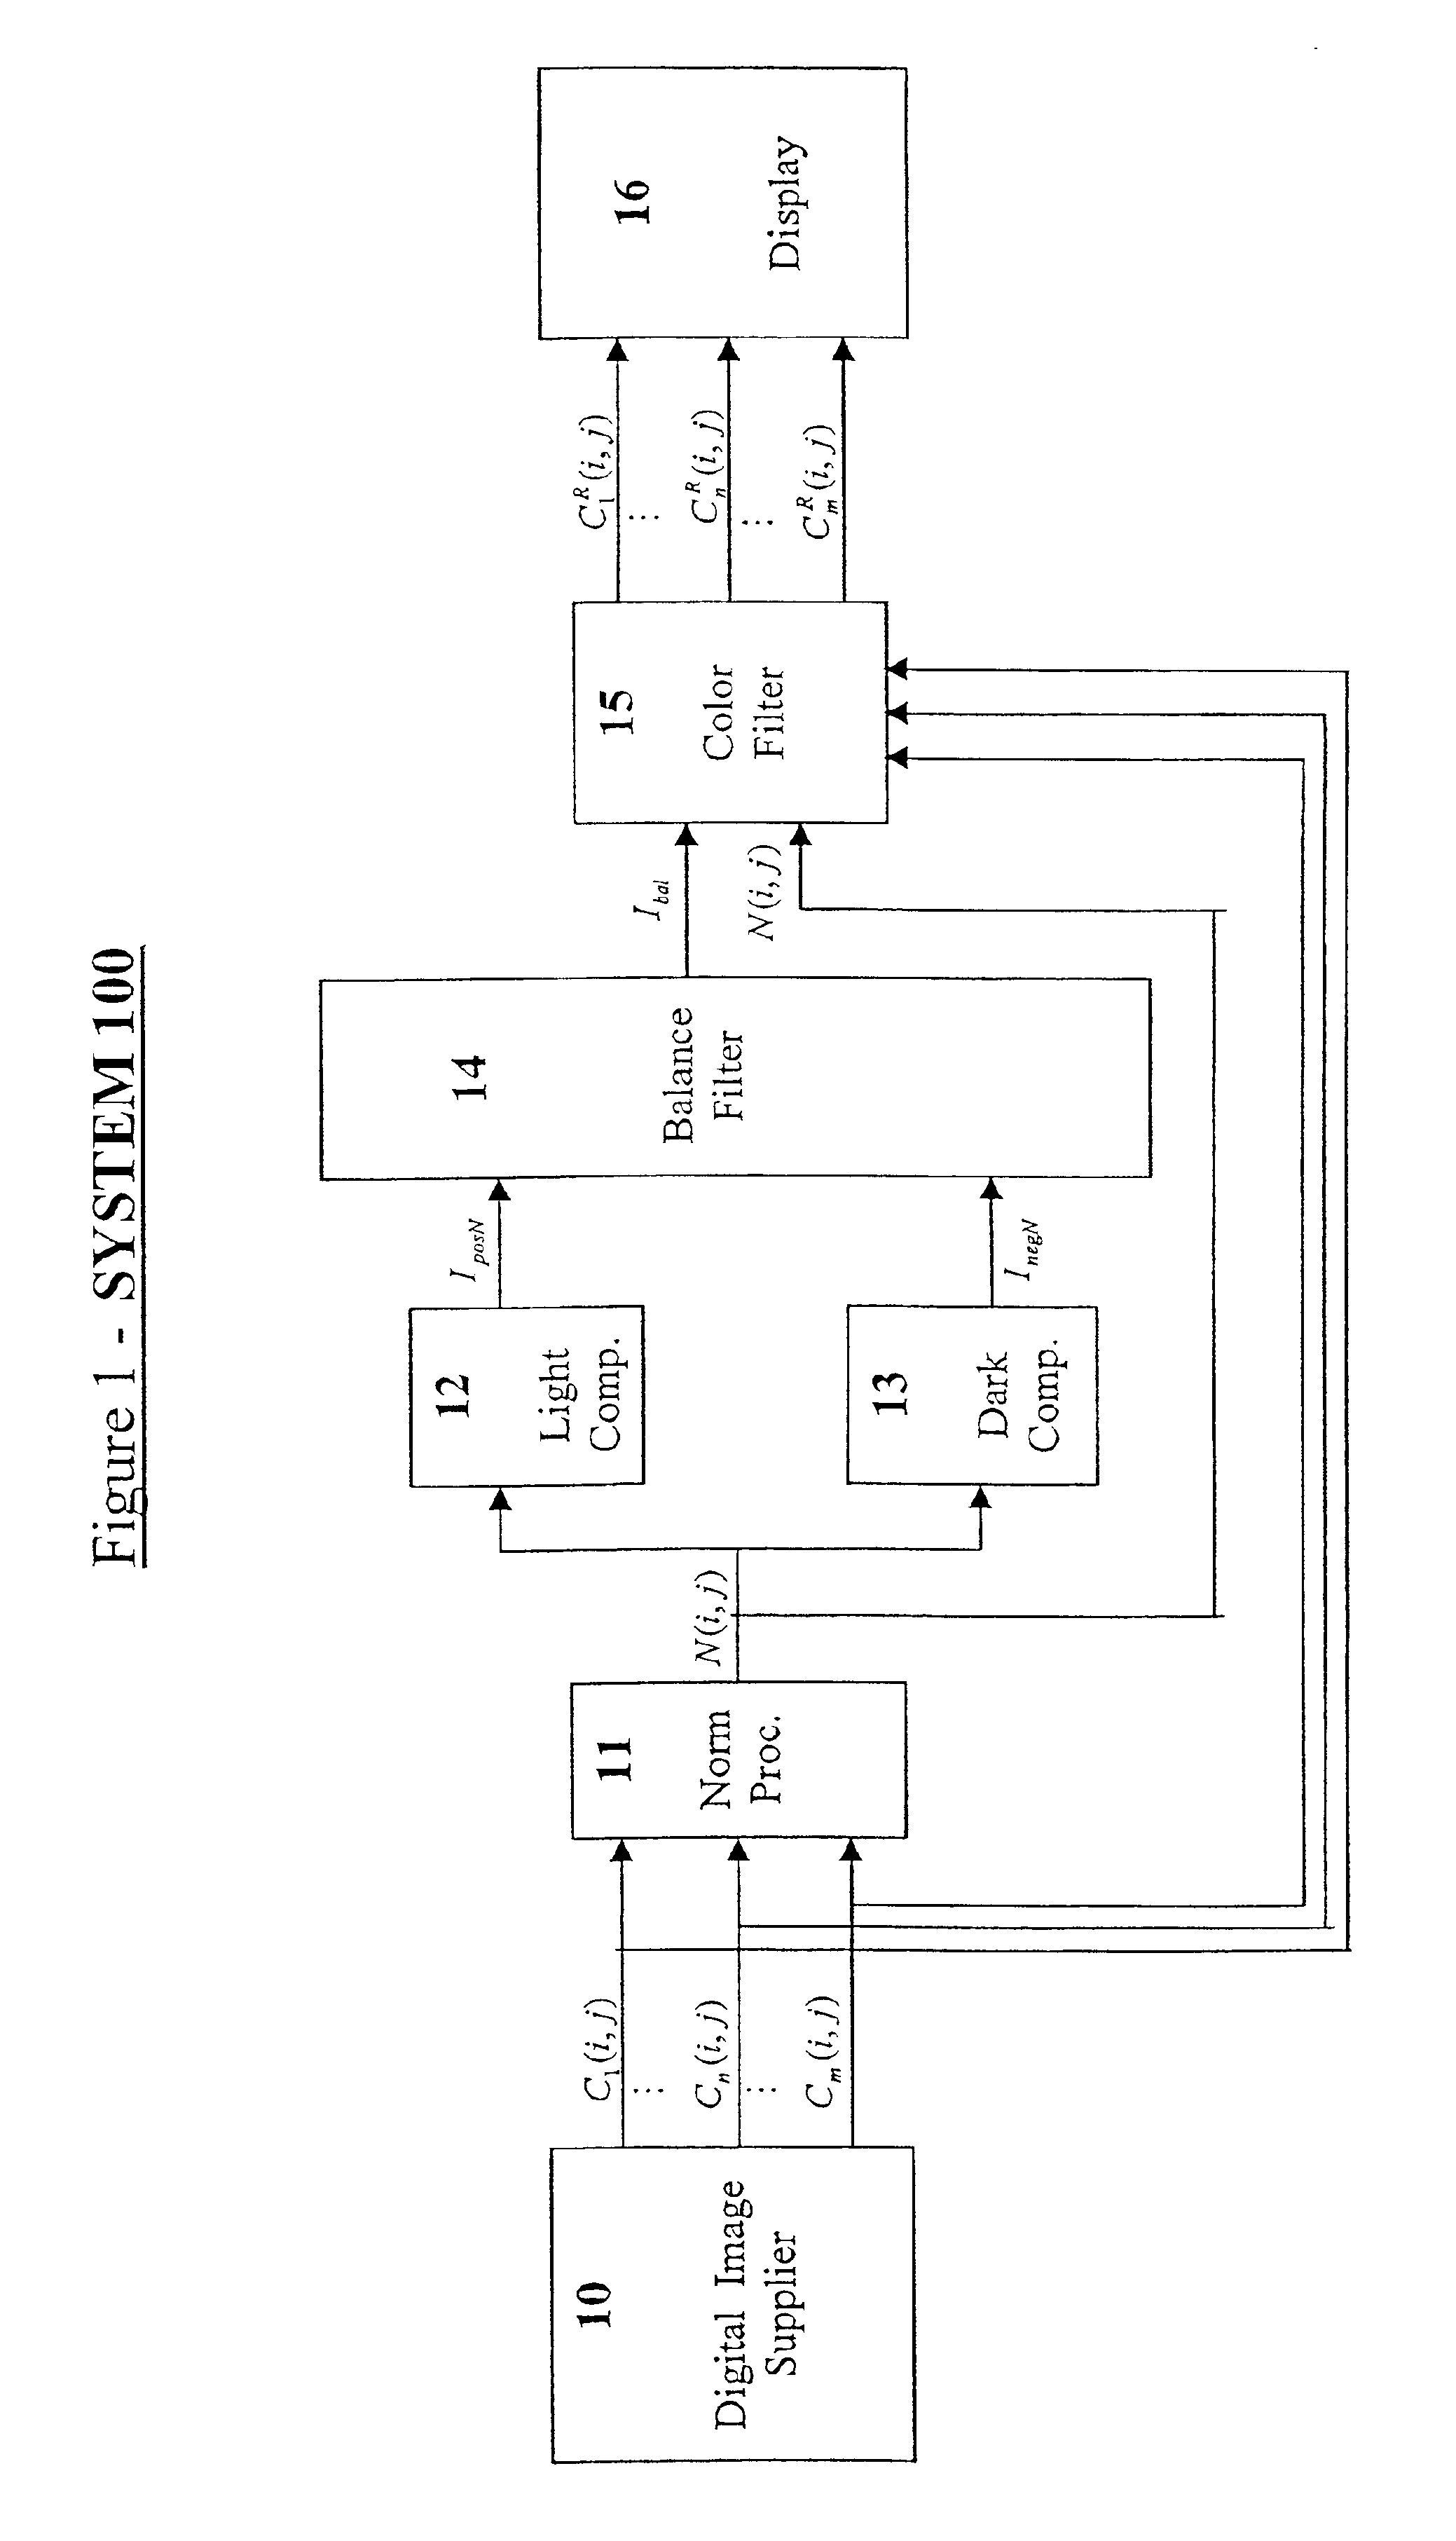 Method for automated high speed improvement of digital color images